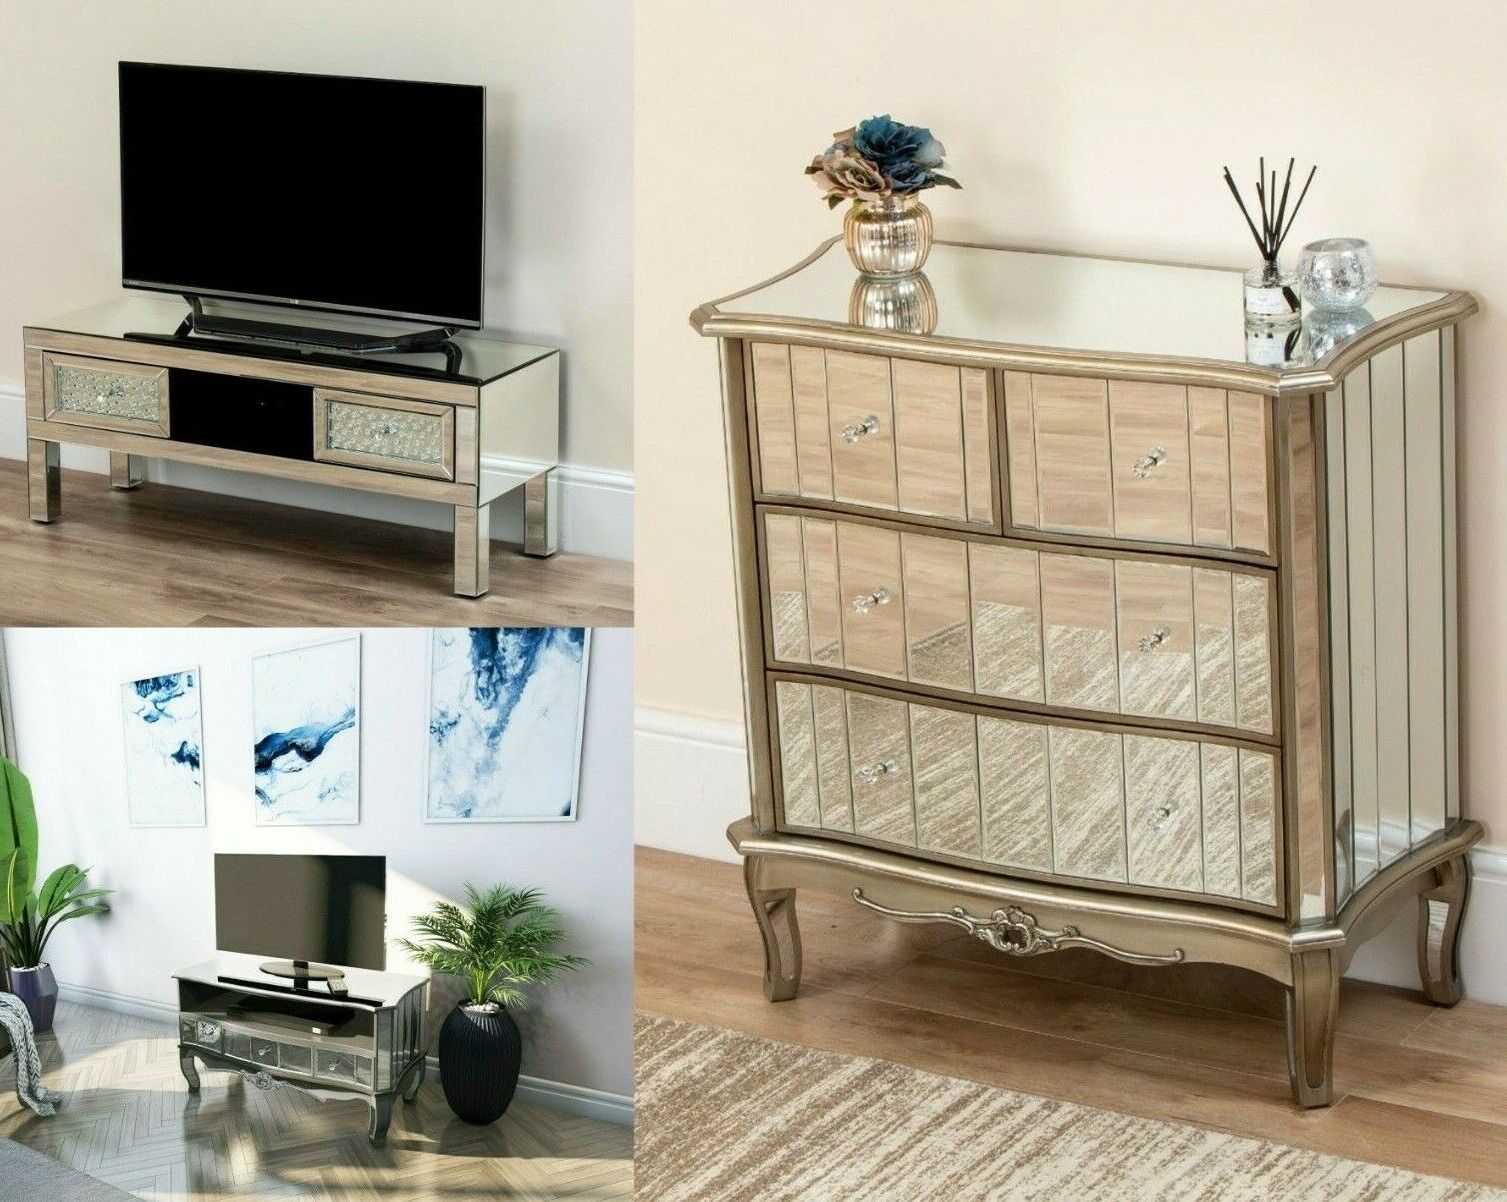 Ebay For Antique Mirrored Tv Stands (View 7 of 10)